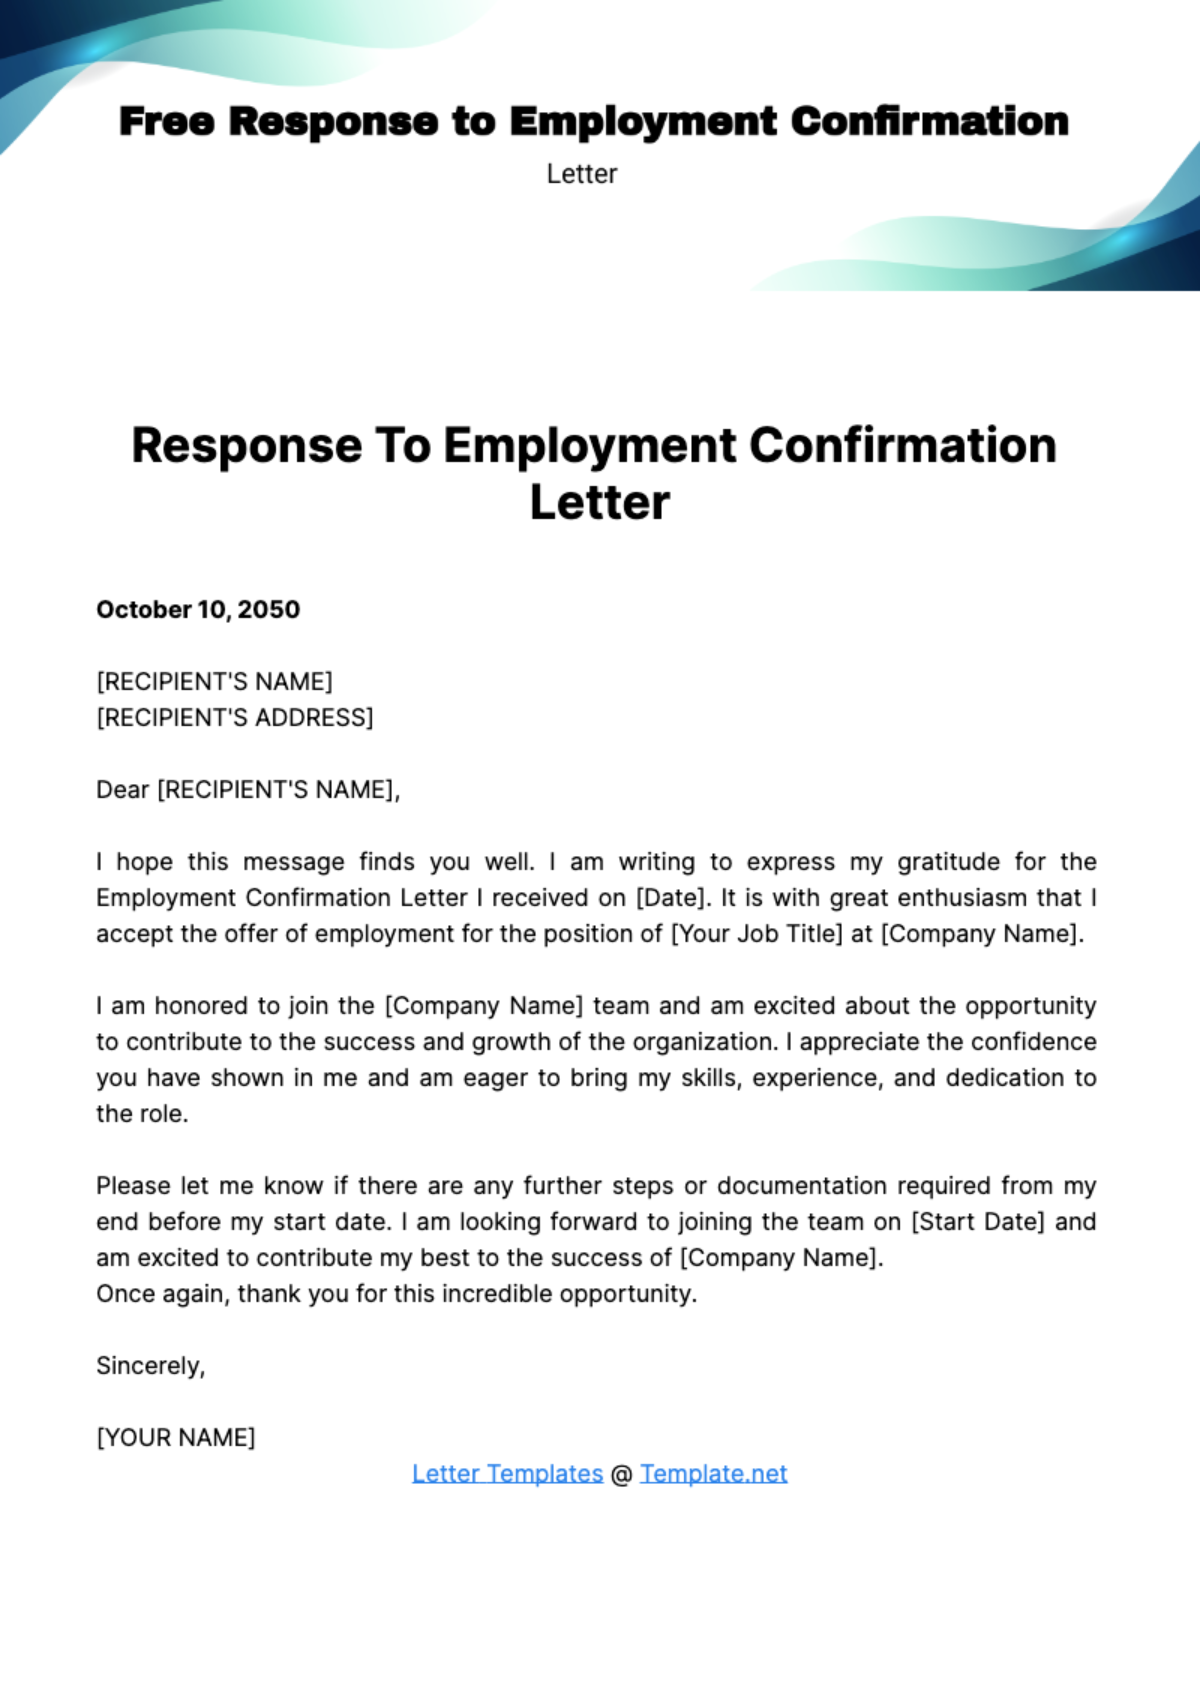 Free Response to Employment Confirmation Letter Template